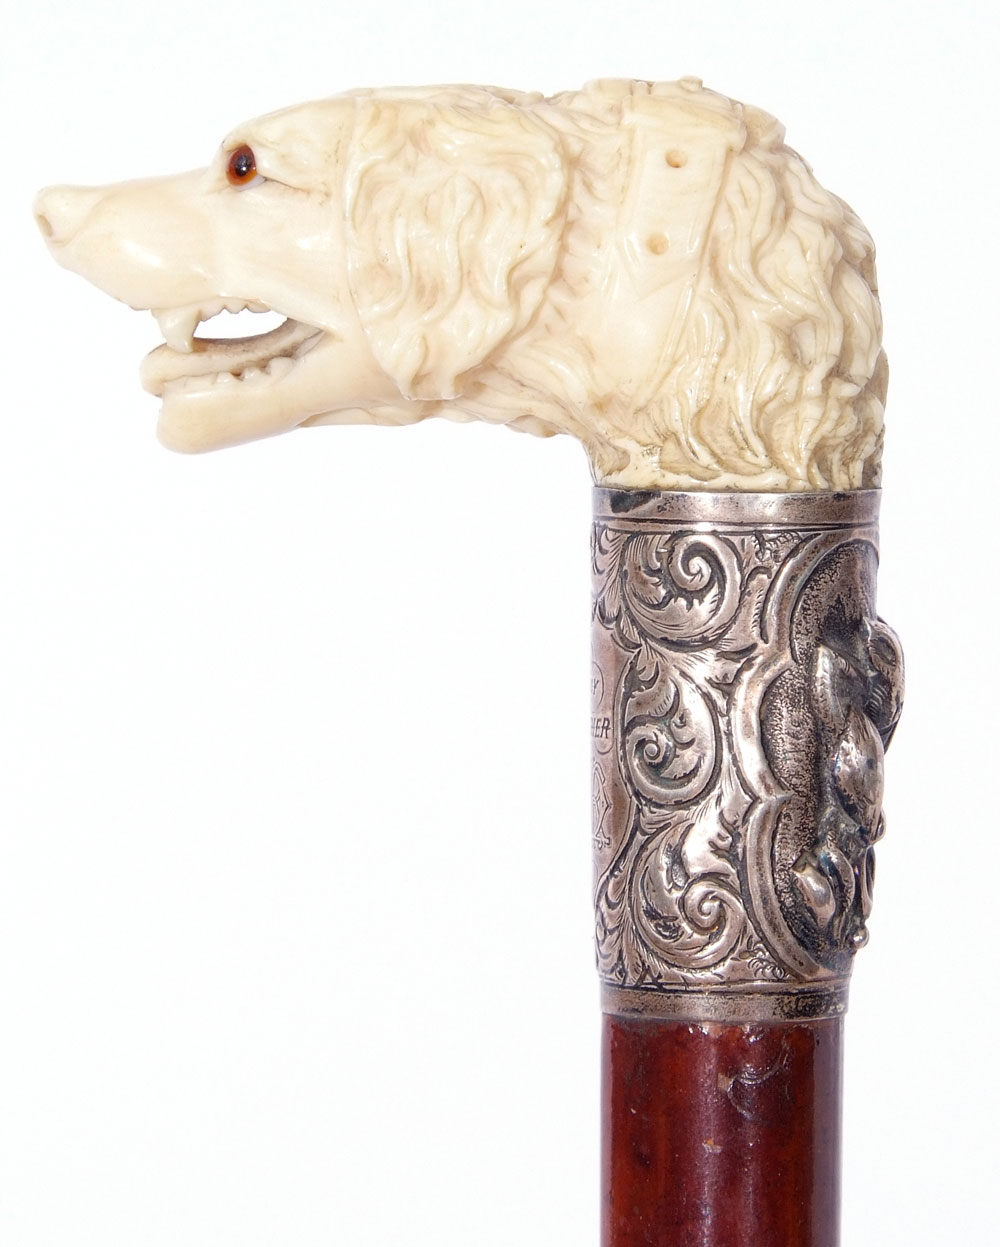 19th century hunting cane, the ivory handle carved in the form of a hound with glass or - Image 7 of 8